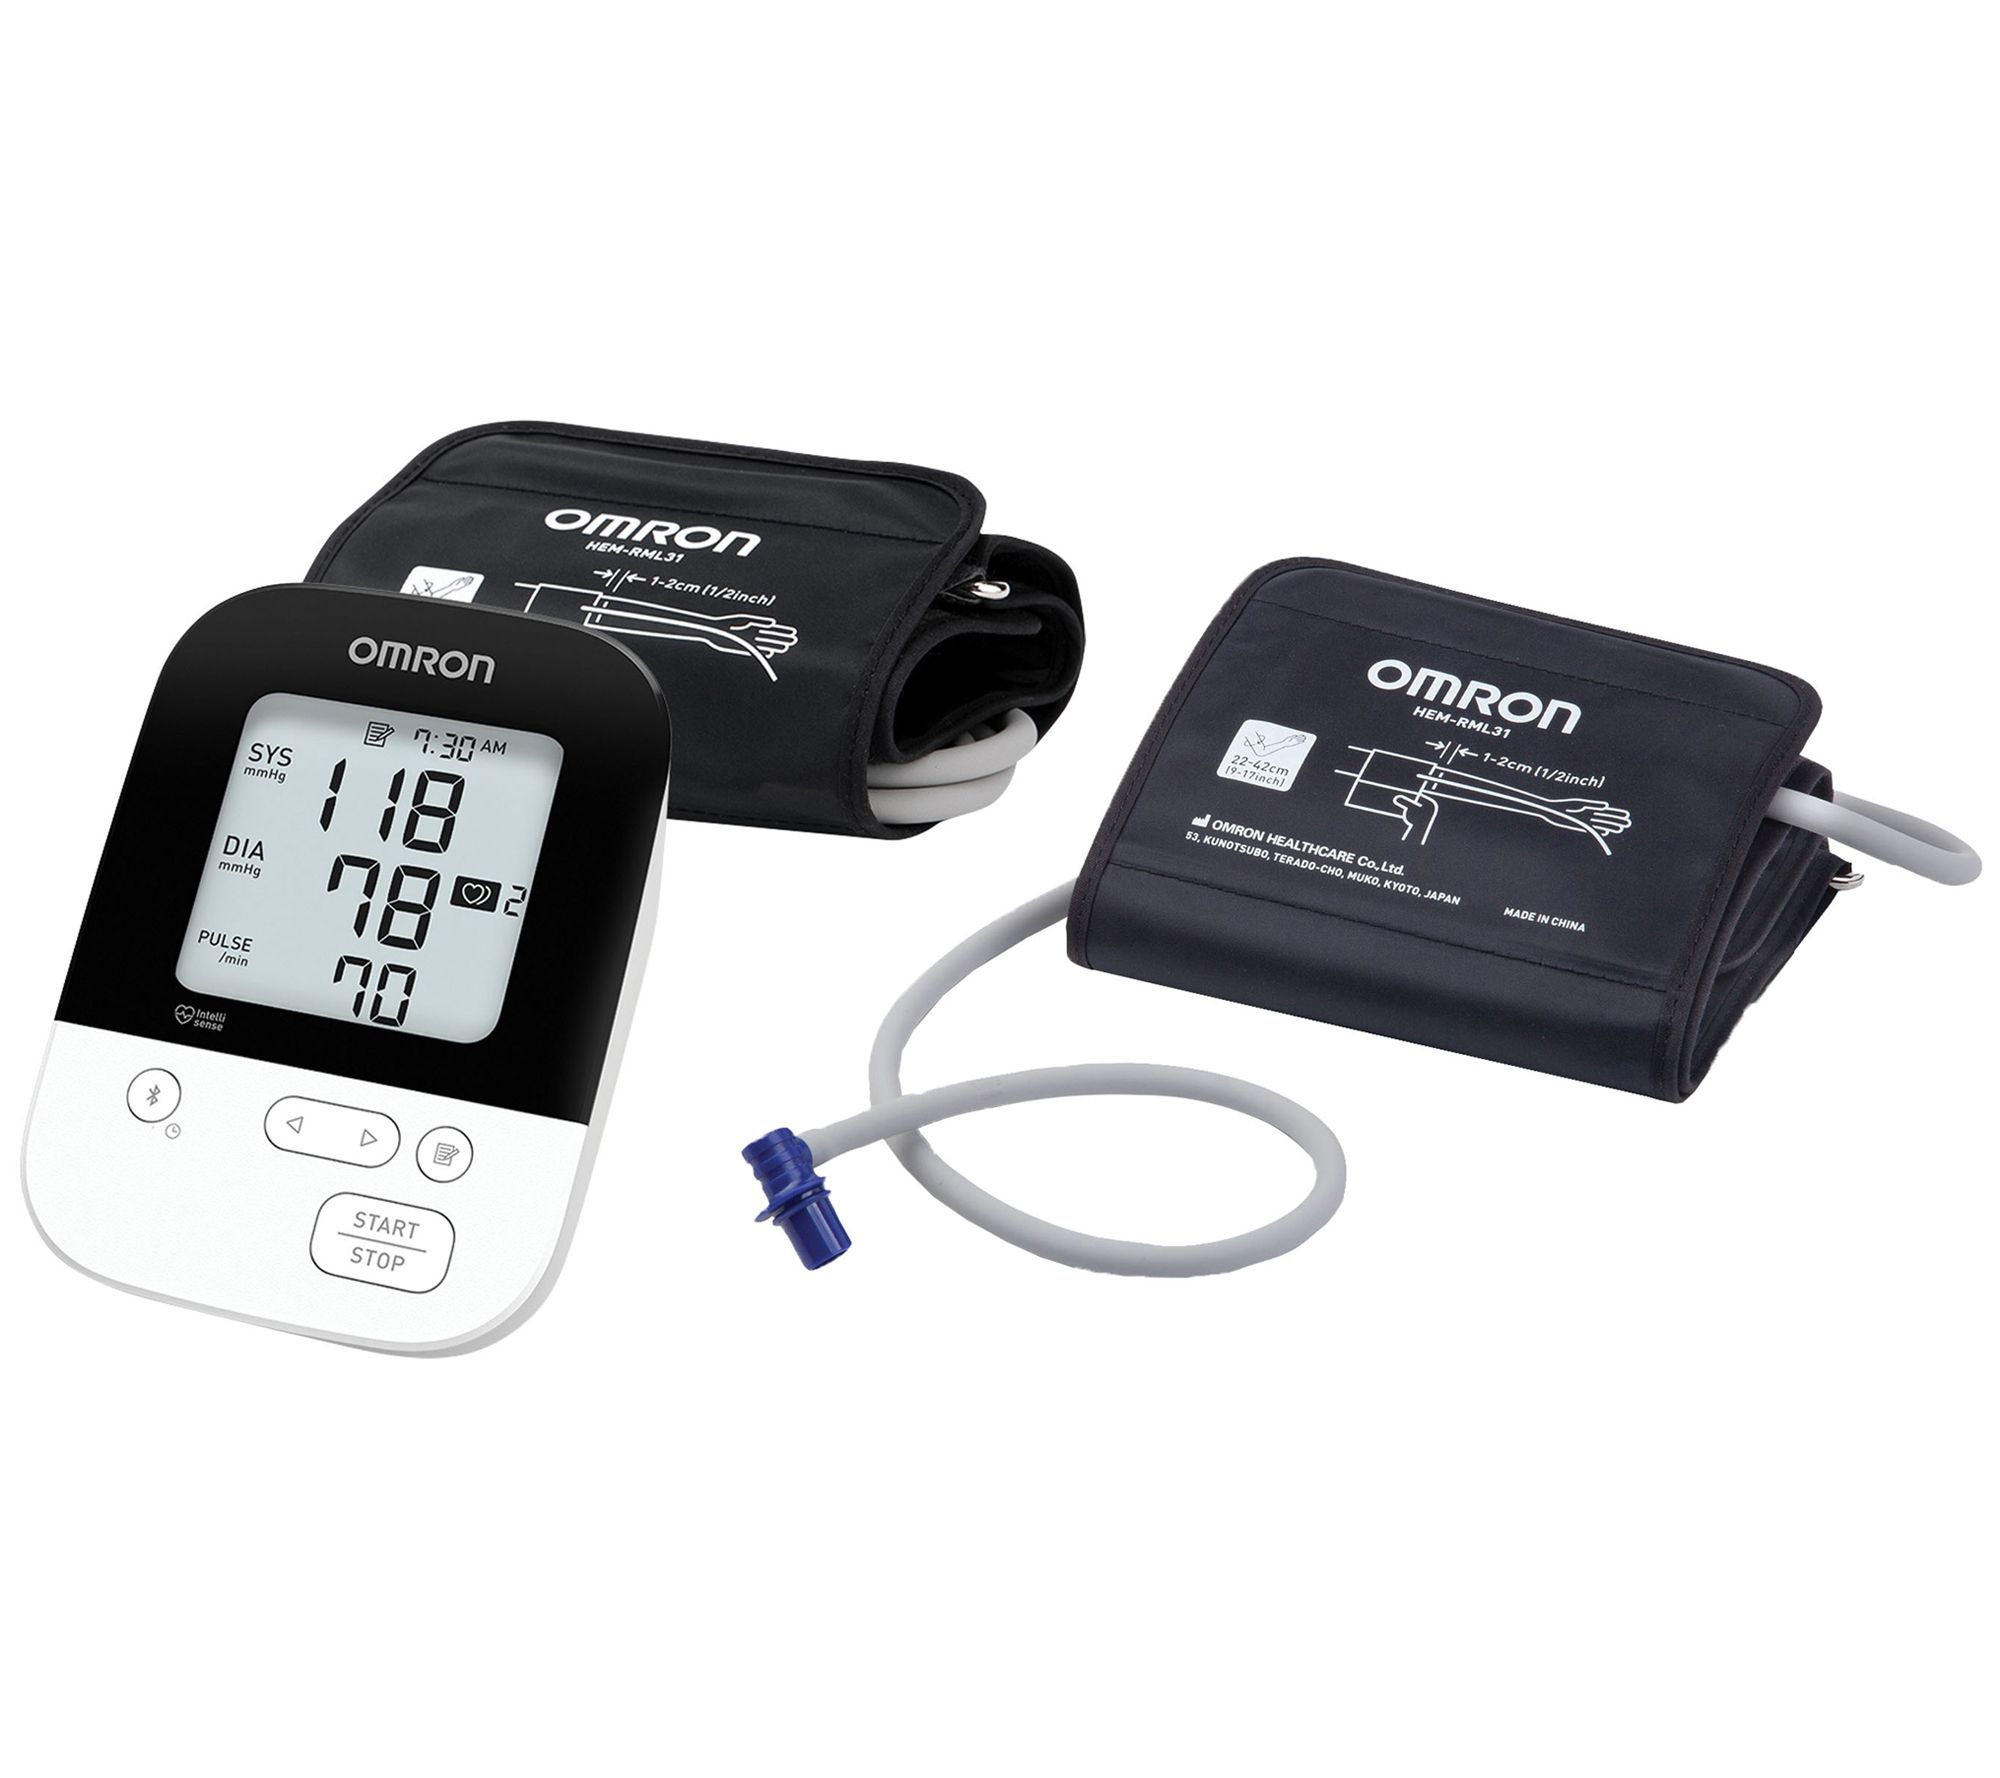 Omron 5 Series Upper Arm Blood Pressure Monitor with Cuff